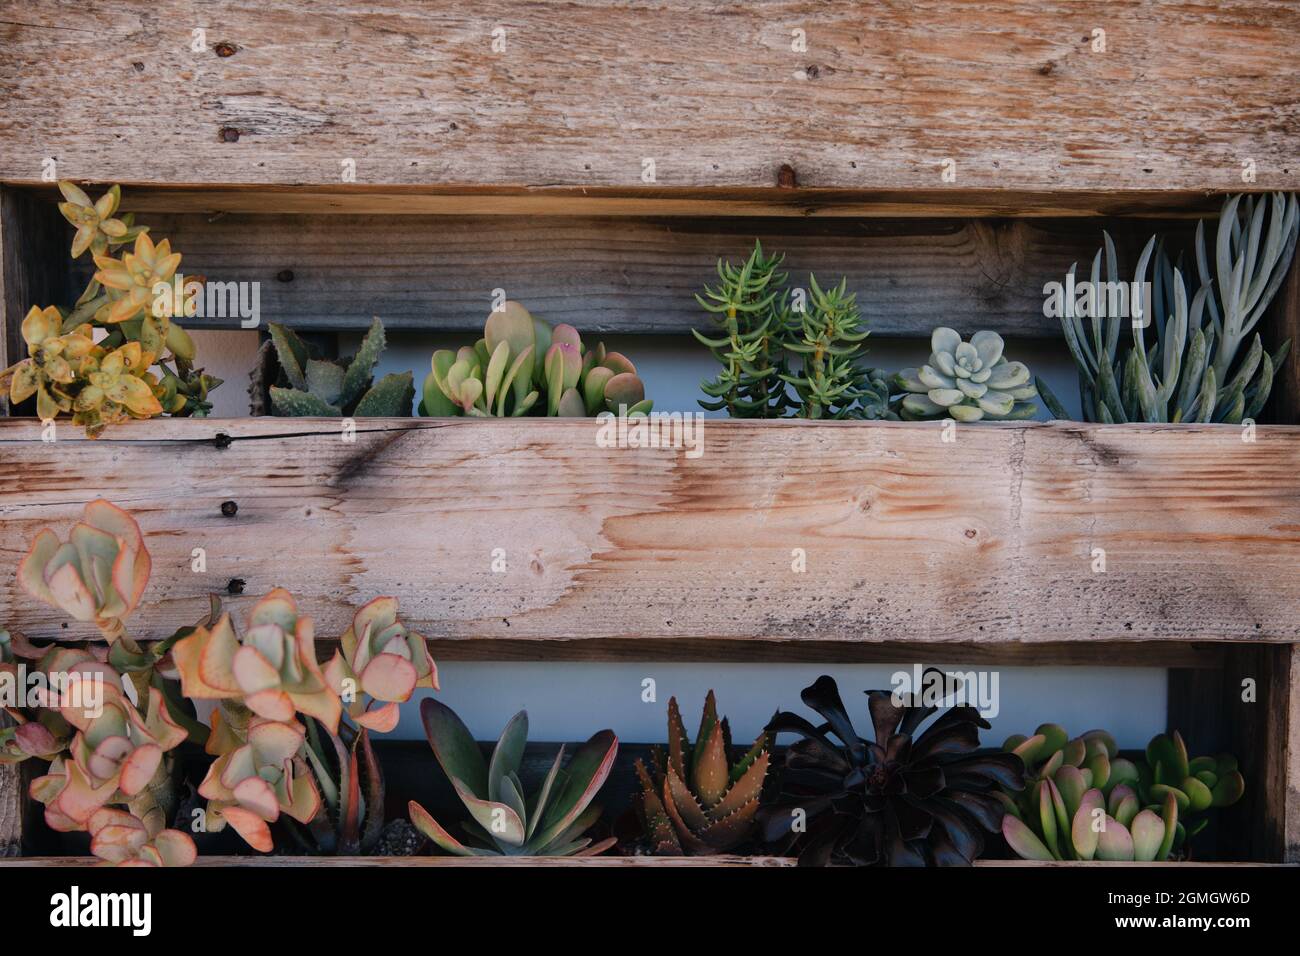 Vertical wooden planters with succulents on white wall with backyard bench and pillows Stock Photo